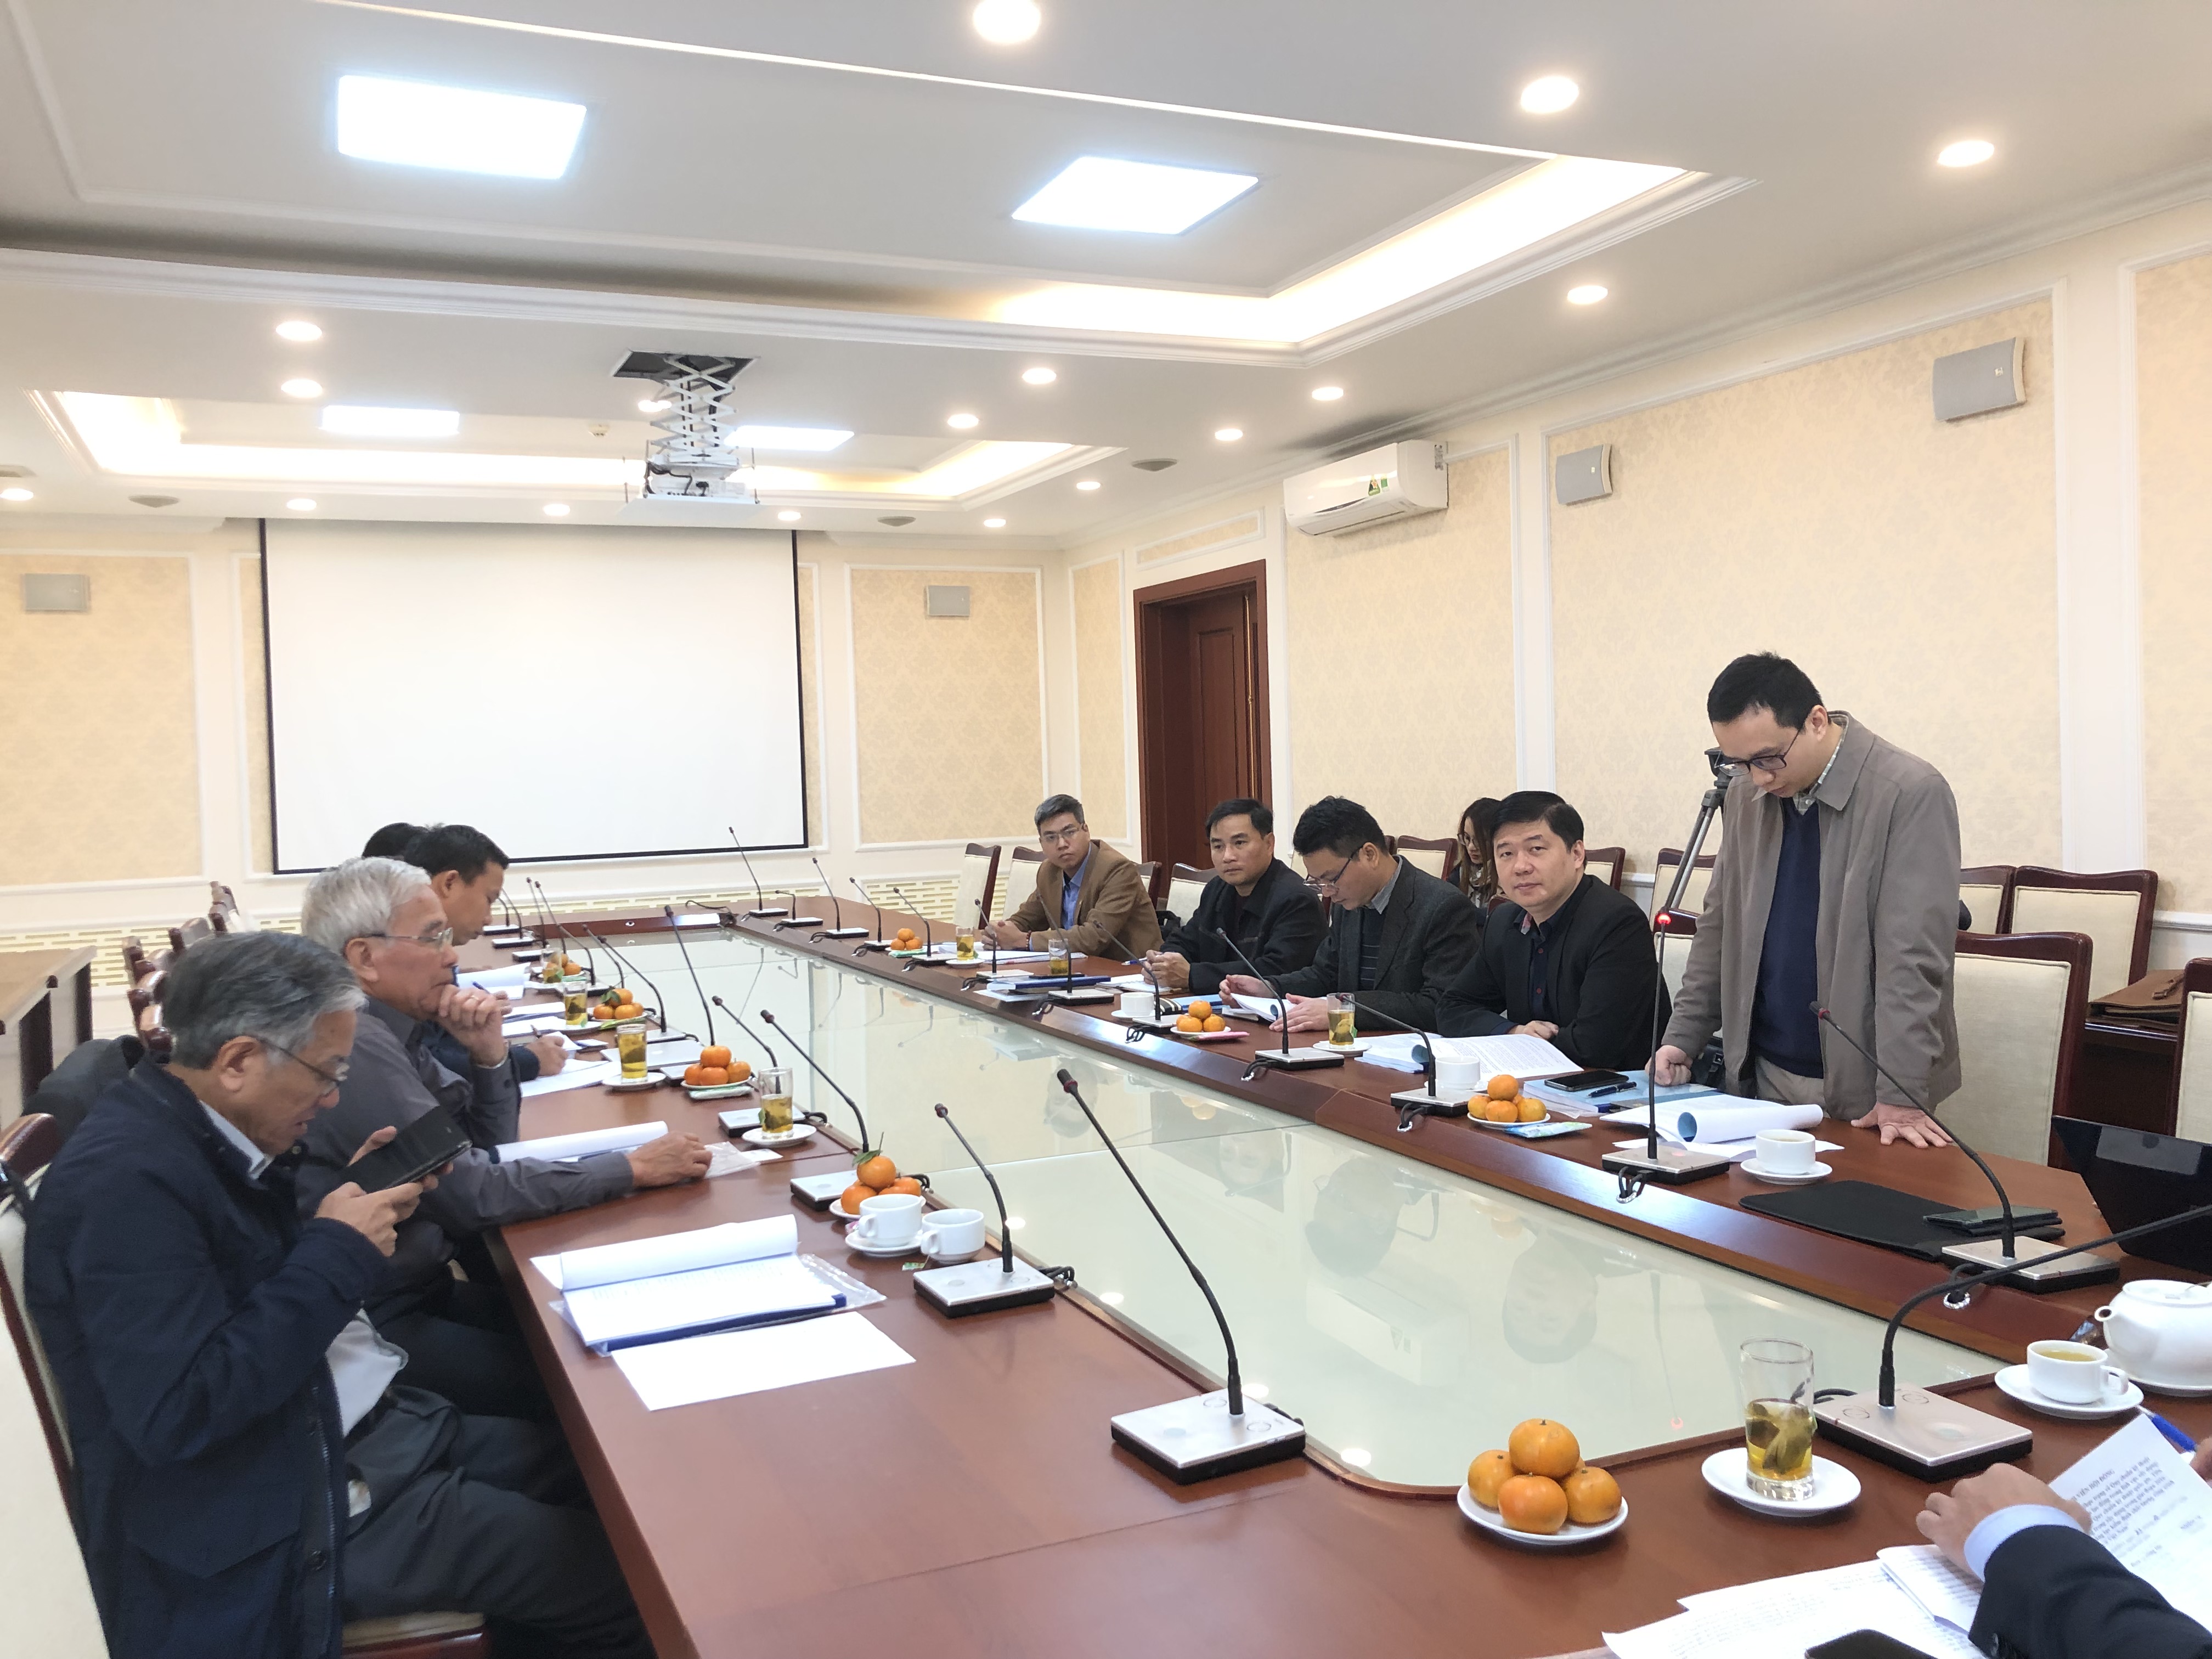 CONINCO attended the meeting the  Acceptance Council for the Ministerial Project implemented by the State Inspection Department - Ministry Construction